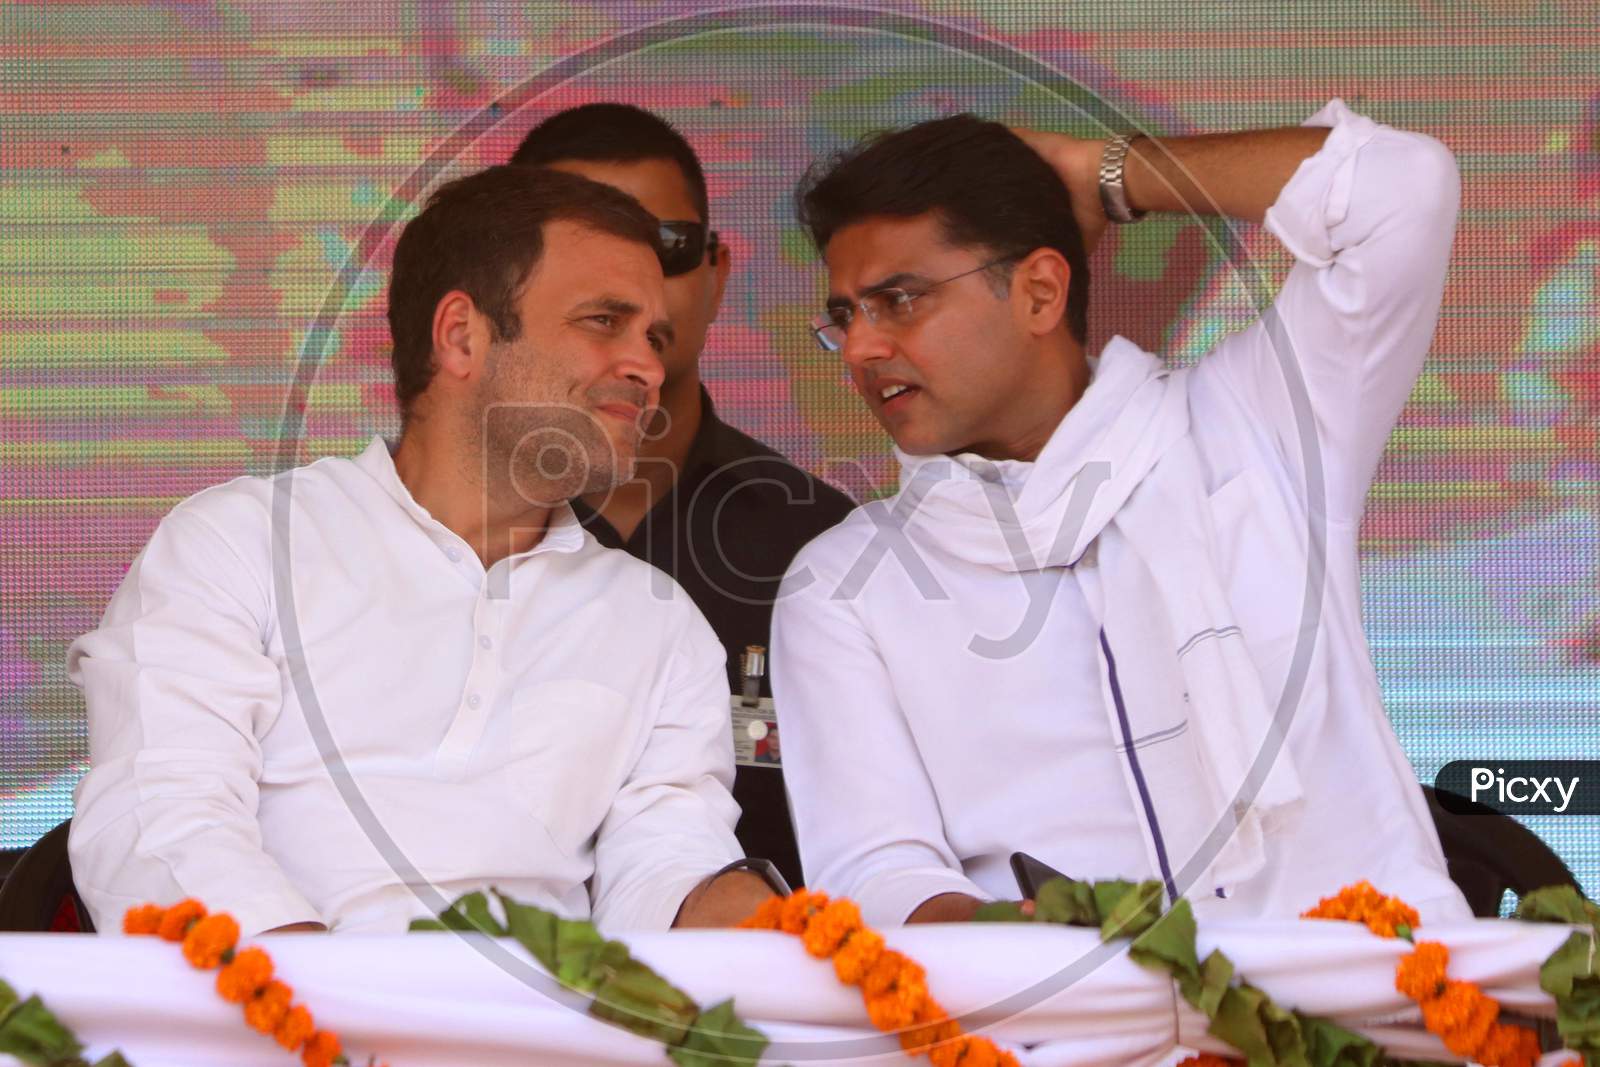 Rahul Gandhi, President of Indian National Congress(INC) with Sachin Pilot, Deputy Chief Minister of Rajasthan during an election campaign rally in Ajmer, Rajasthan on April 25, 2019